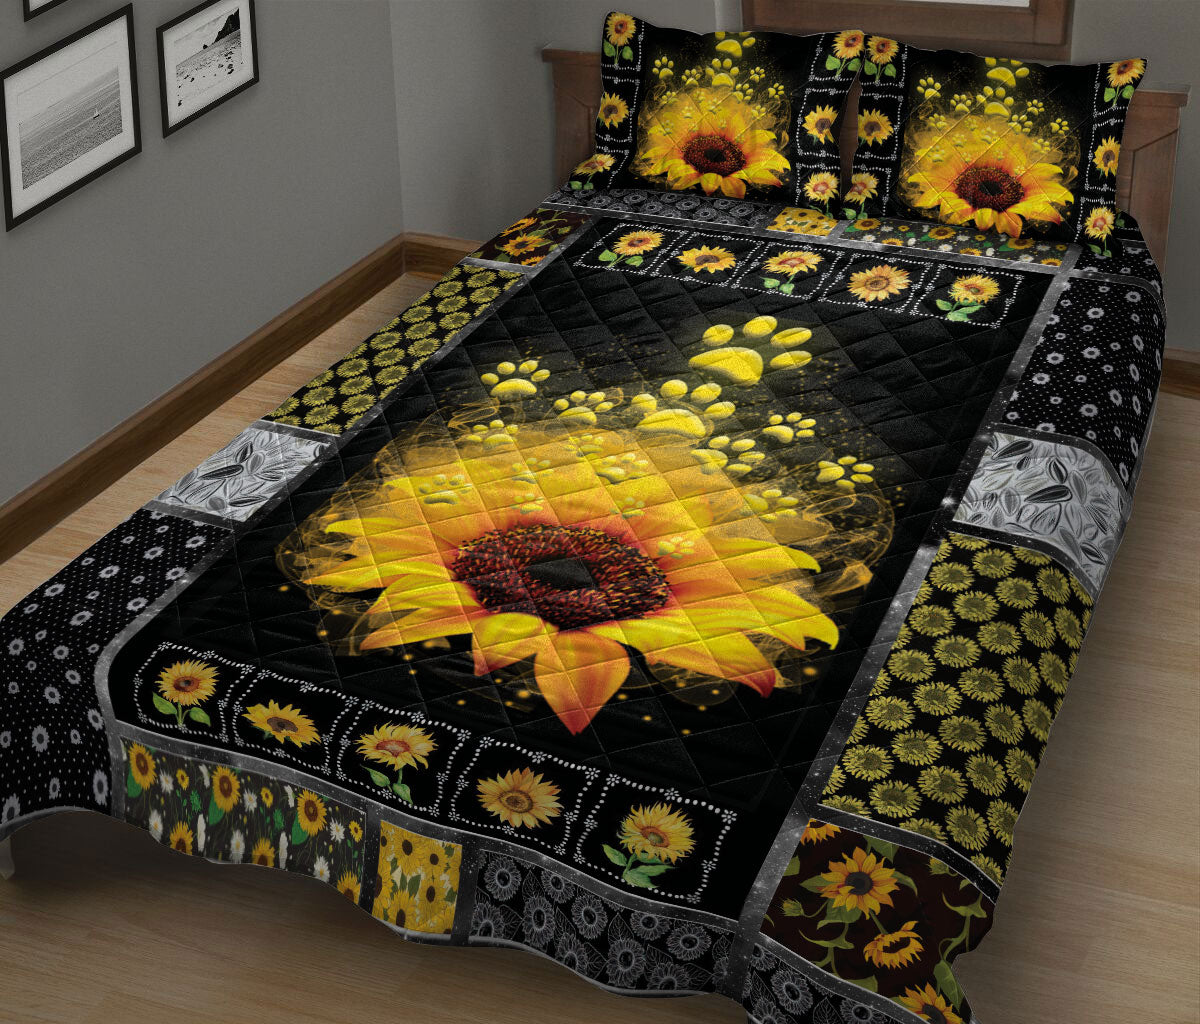 Ohaprints-Quilt-Bed-Set-Pillowcase-Dog-Cat-Paw-Love-Sunflower-Yellow-Floral-Patchwork-Pattern-Blanket-Bedspread-Bedding-2992-King (90'' x 100'')